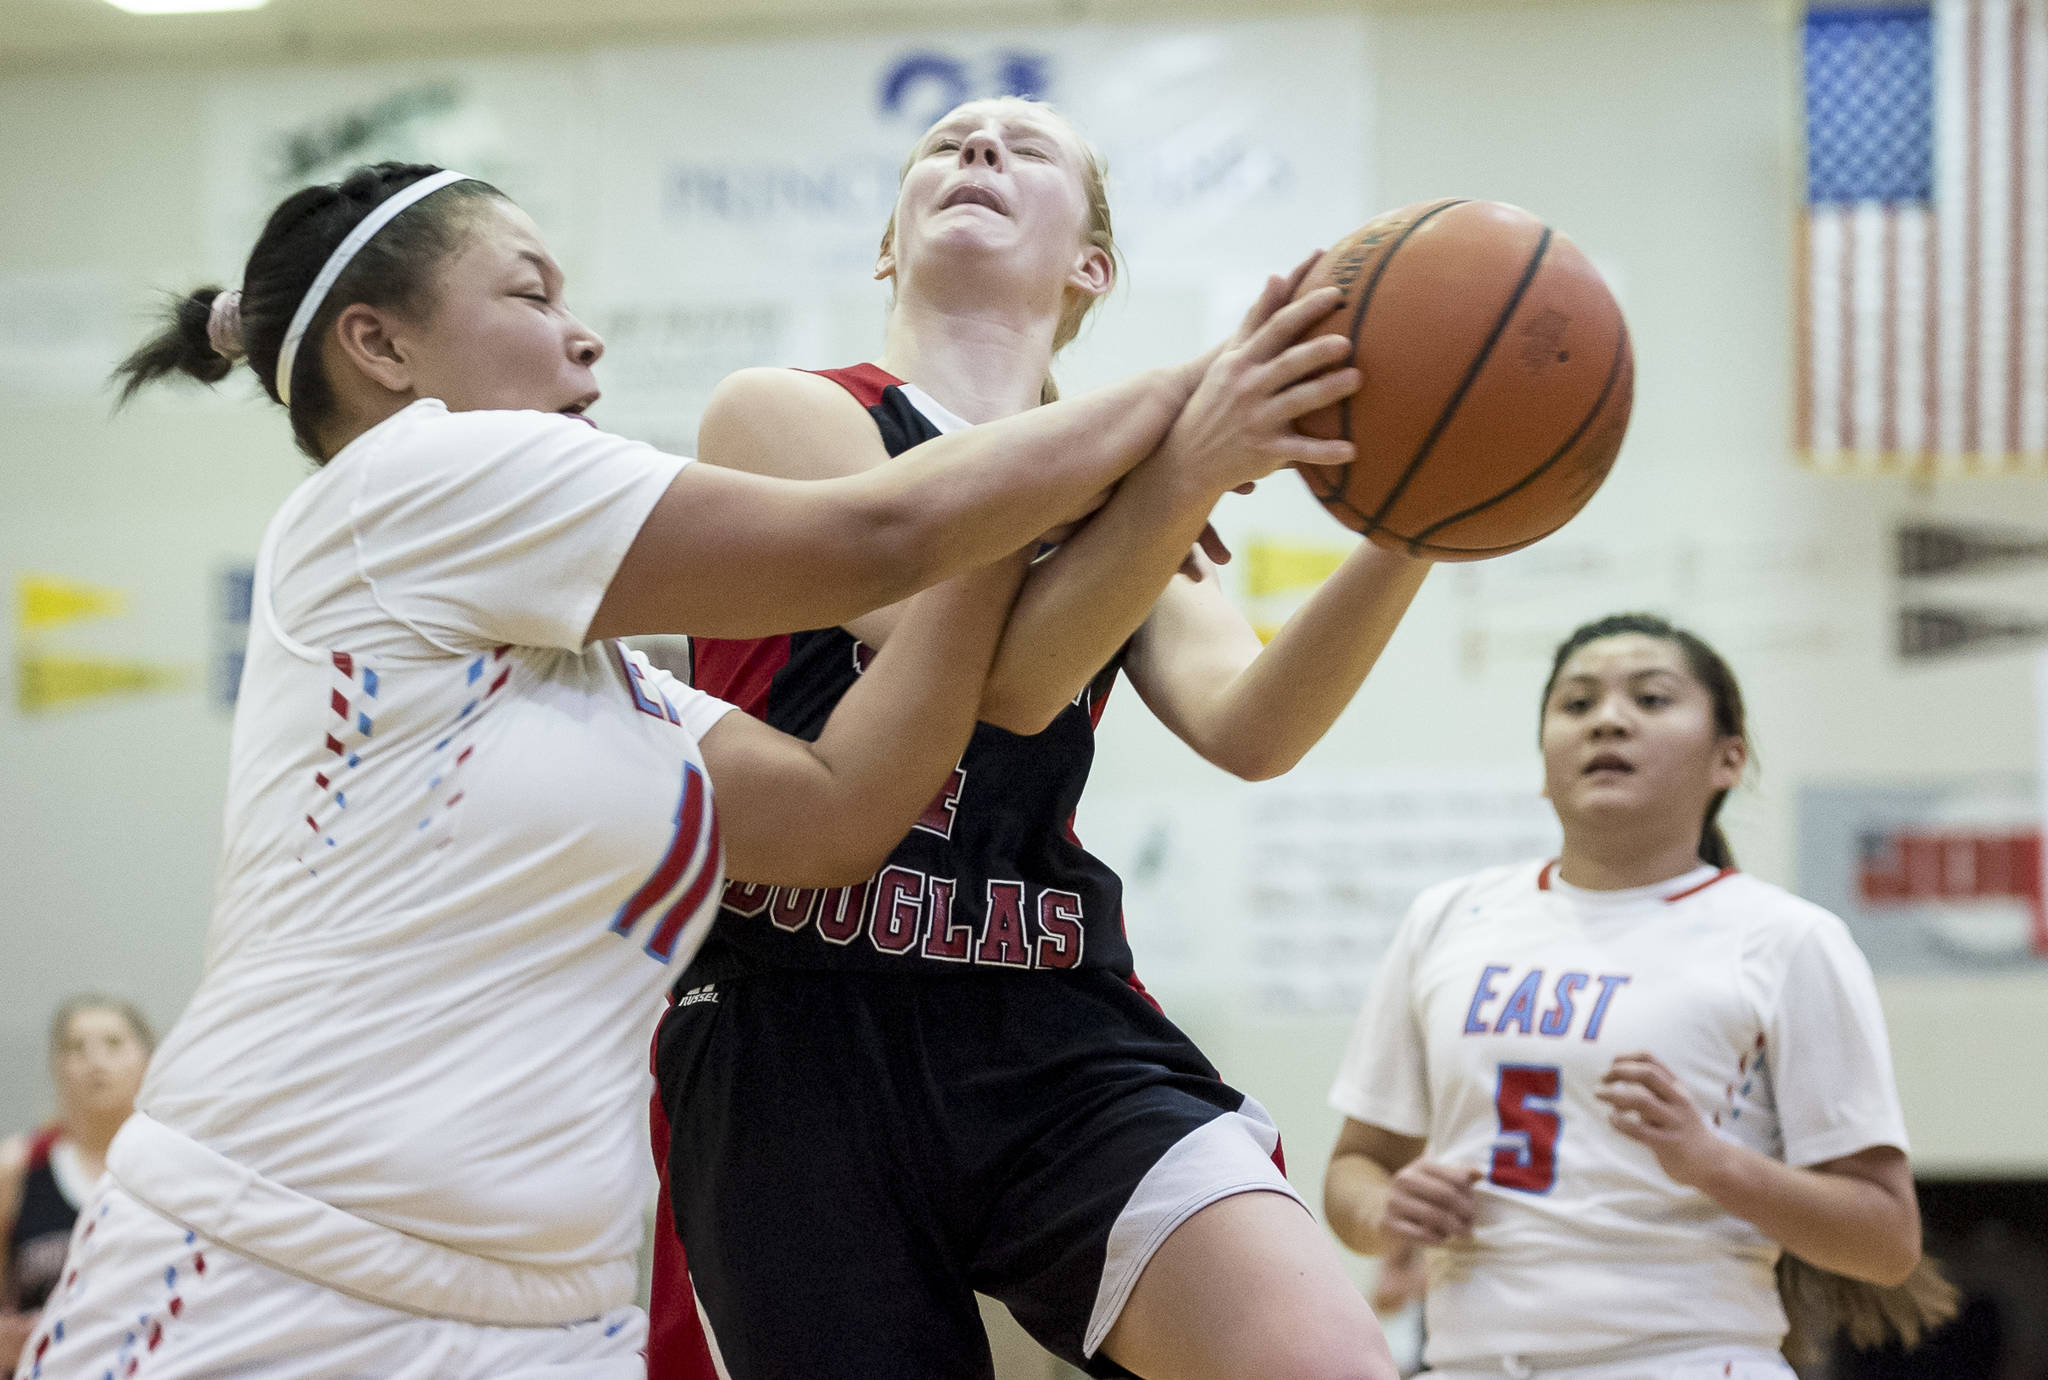 Juneau-Douglas’ Sadie Tuckwood is fouled on the way to the basket by East’s Amari Brown at the Princess Cruises Capital City Classic at Juneau-Douglas High School on Saturday, Dec. 29, 2018. East won 57-55. (Michael Penn | Juneau Empire)